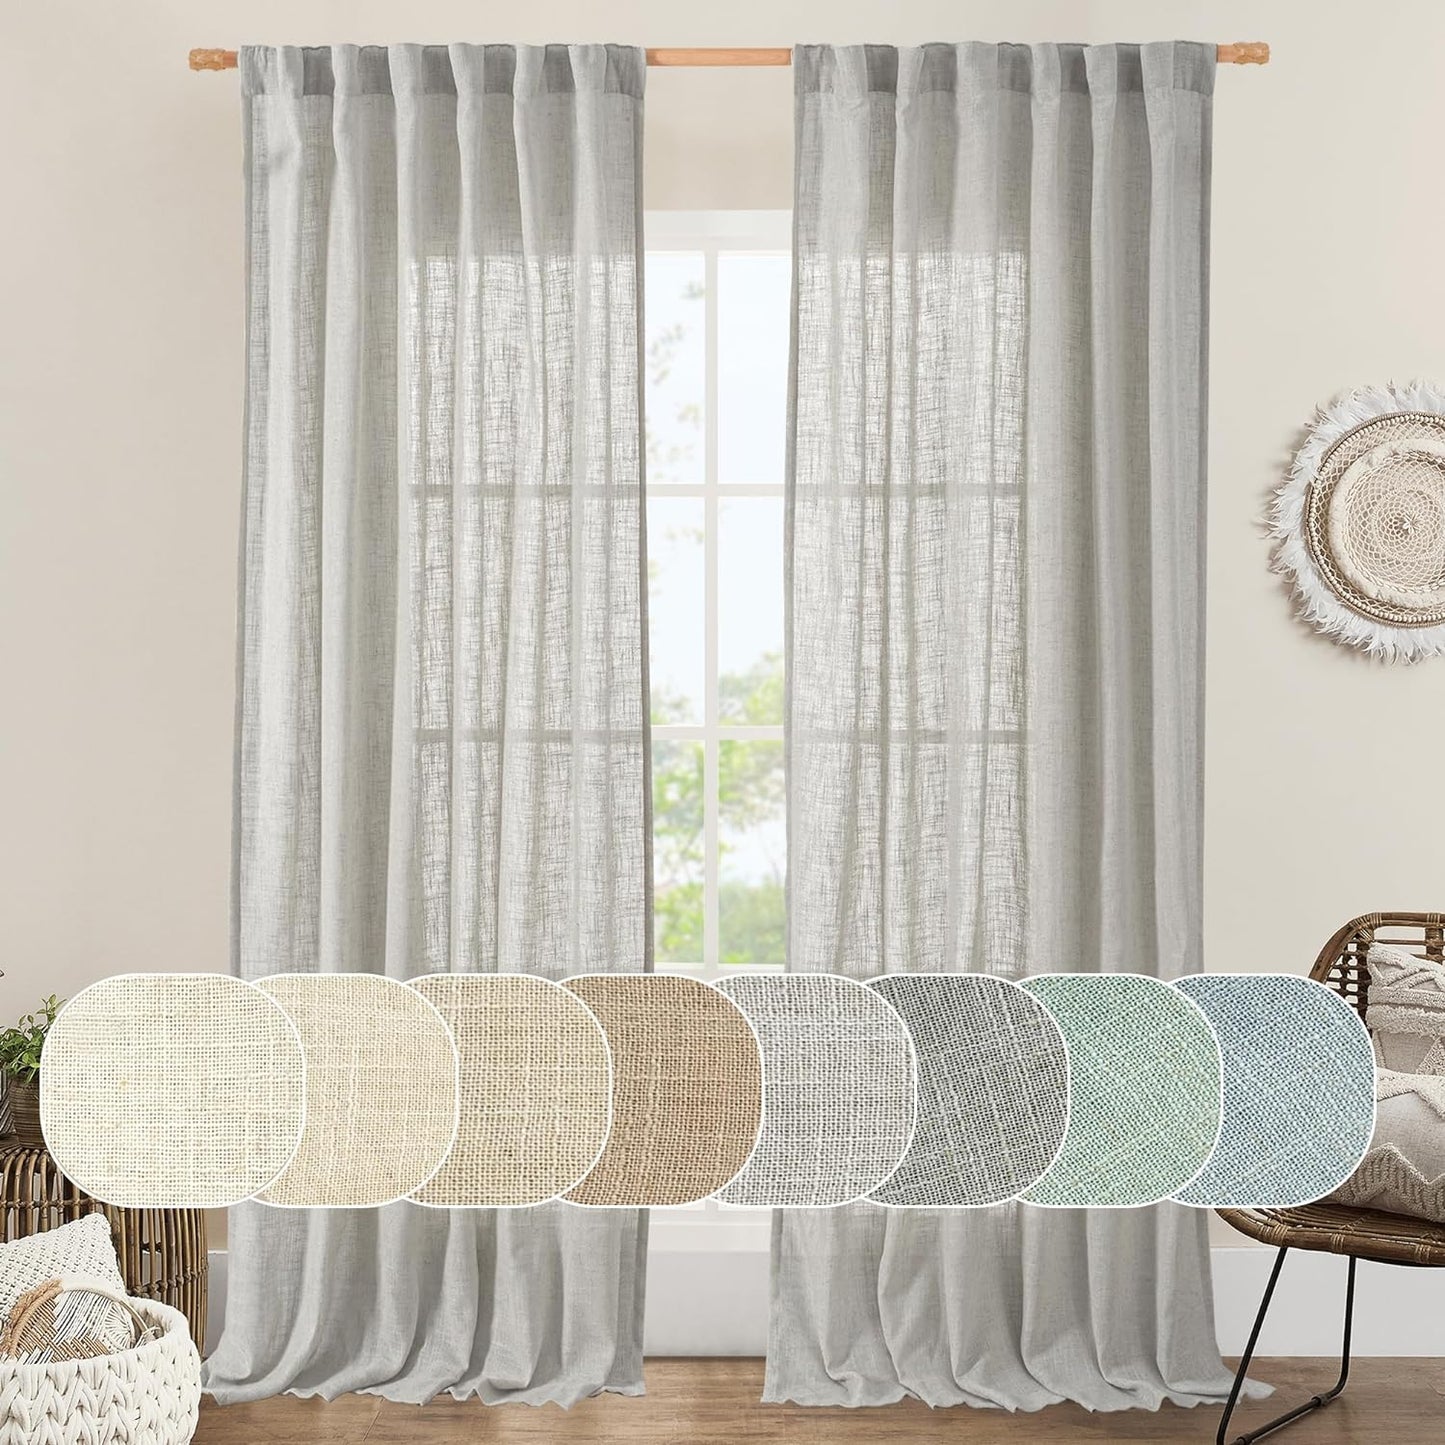 LAMIT Natural Linen Blended Curtains for Living Room, Back Tab and Rod Pocket Semi Sheer Curtains Light Filtering Country Rustic Drapes for Bedroom/Farmhouse, 2 Panels,52 X 108 Inch, Linen  LAMIT Light Grey 52W X 95L 